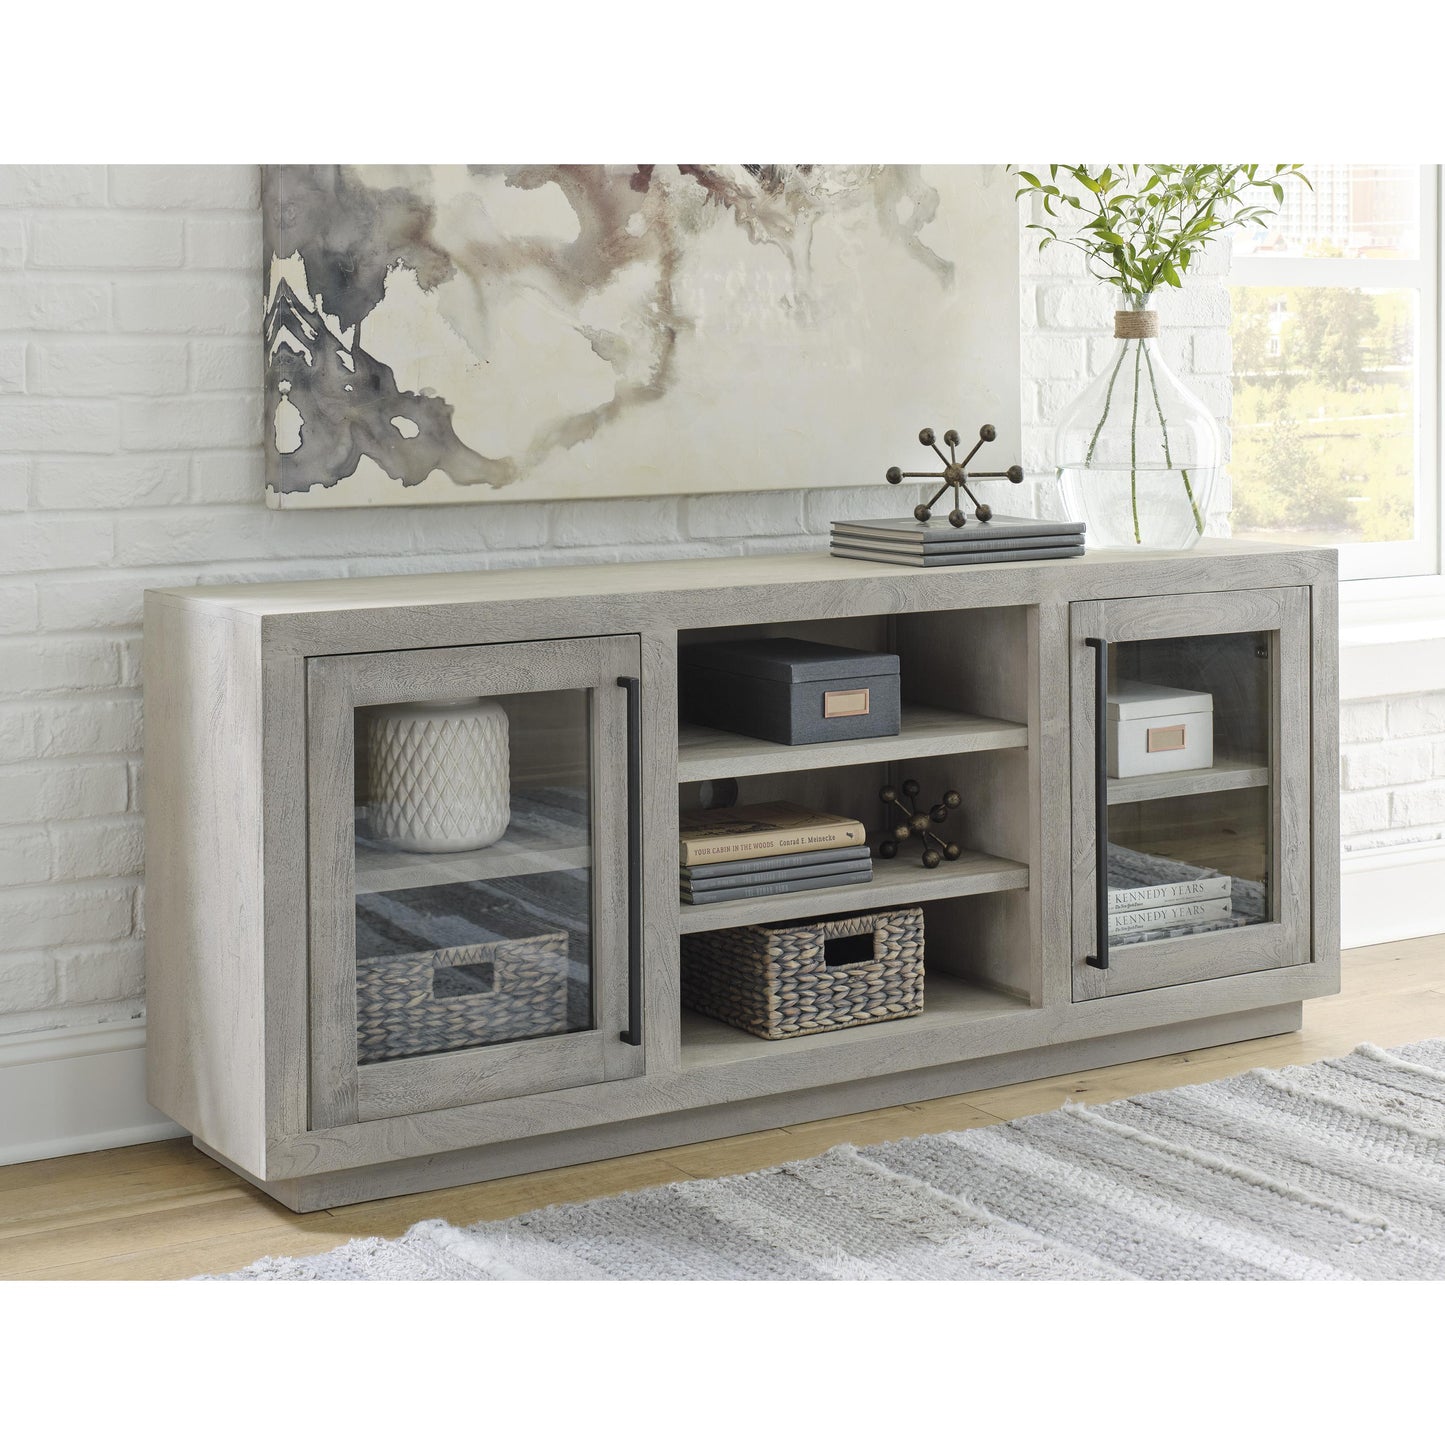 Signature Design by Ashley Accent Cabinets Cabinets A4000430 IMAGE 6